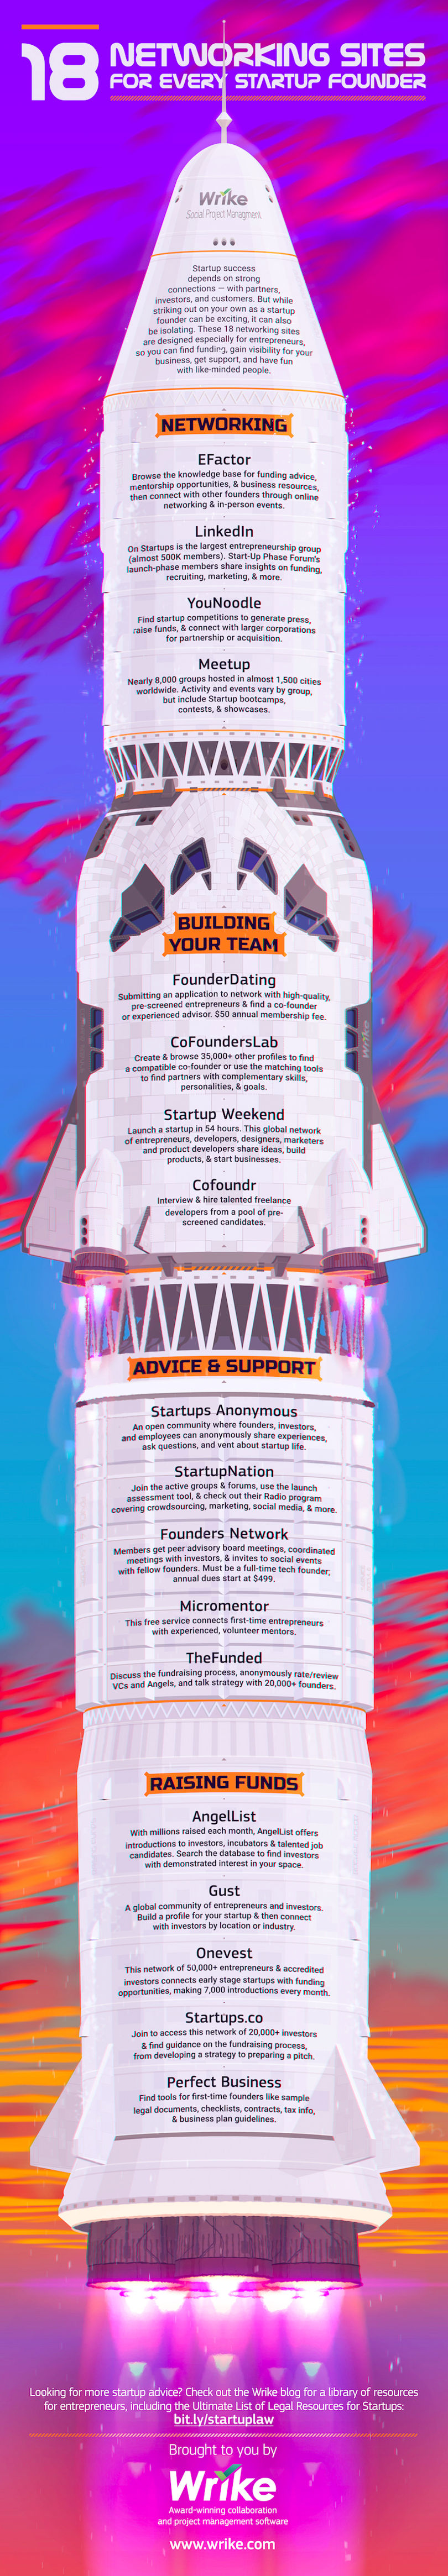 18 Top Networking Sites for Startup Founders (Infographic)